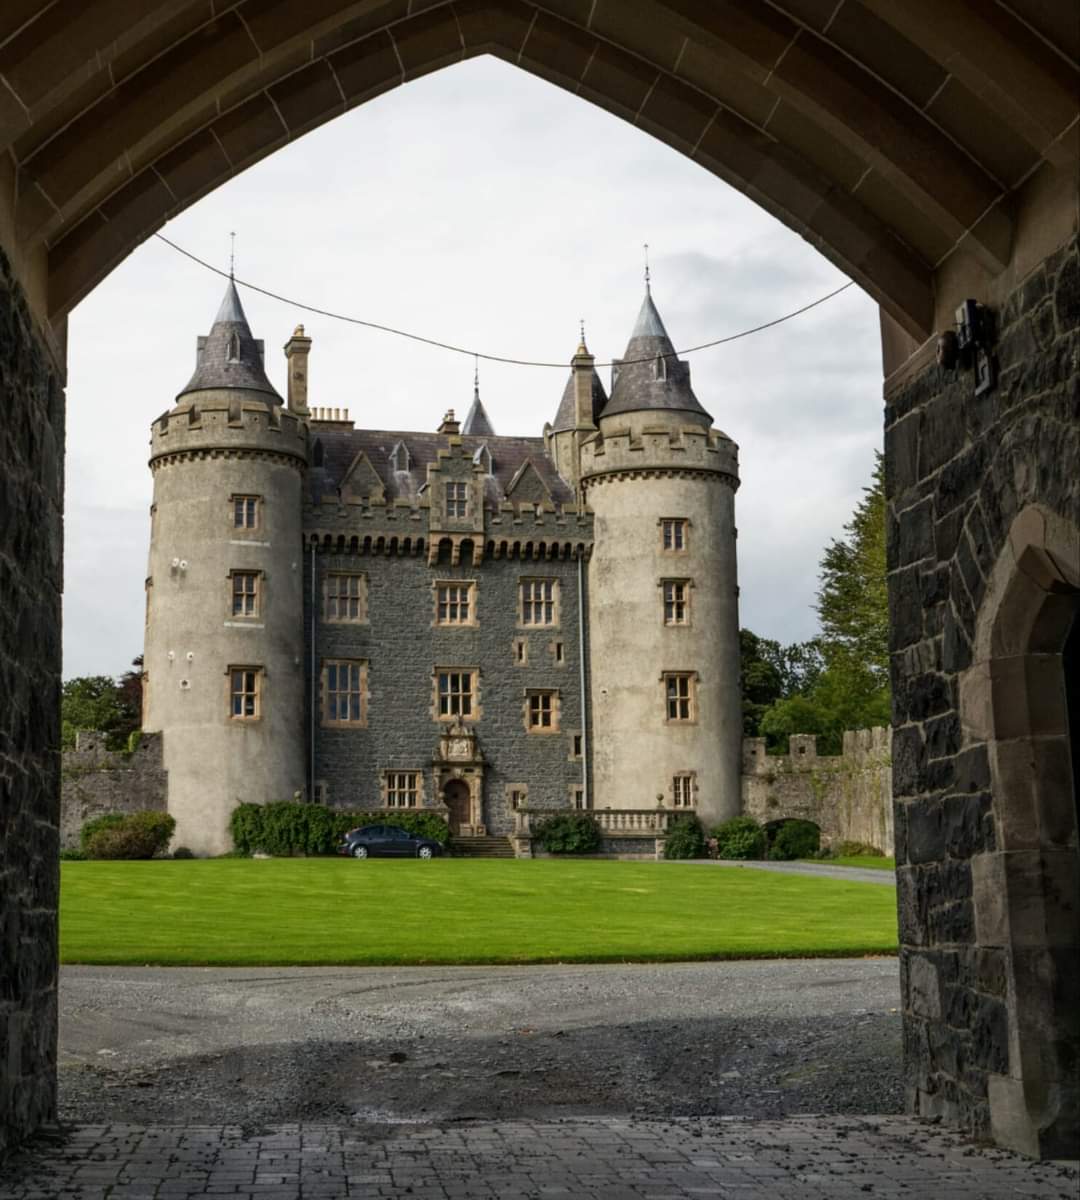 Killyleagh Castle, in village of Killyleagh, County Down, Northern Ireland. It dominates small village and is believed to be amongst one of oldest inhabited castles in country, with parts dating back to 1180 CE.

#archaeohistories